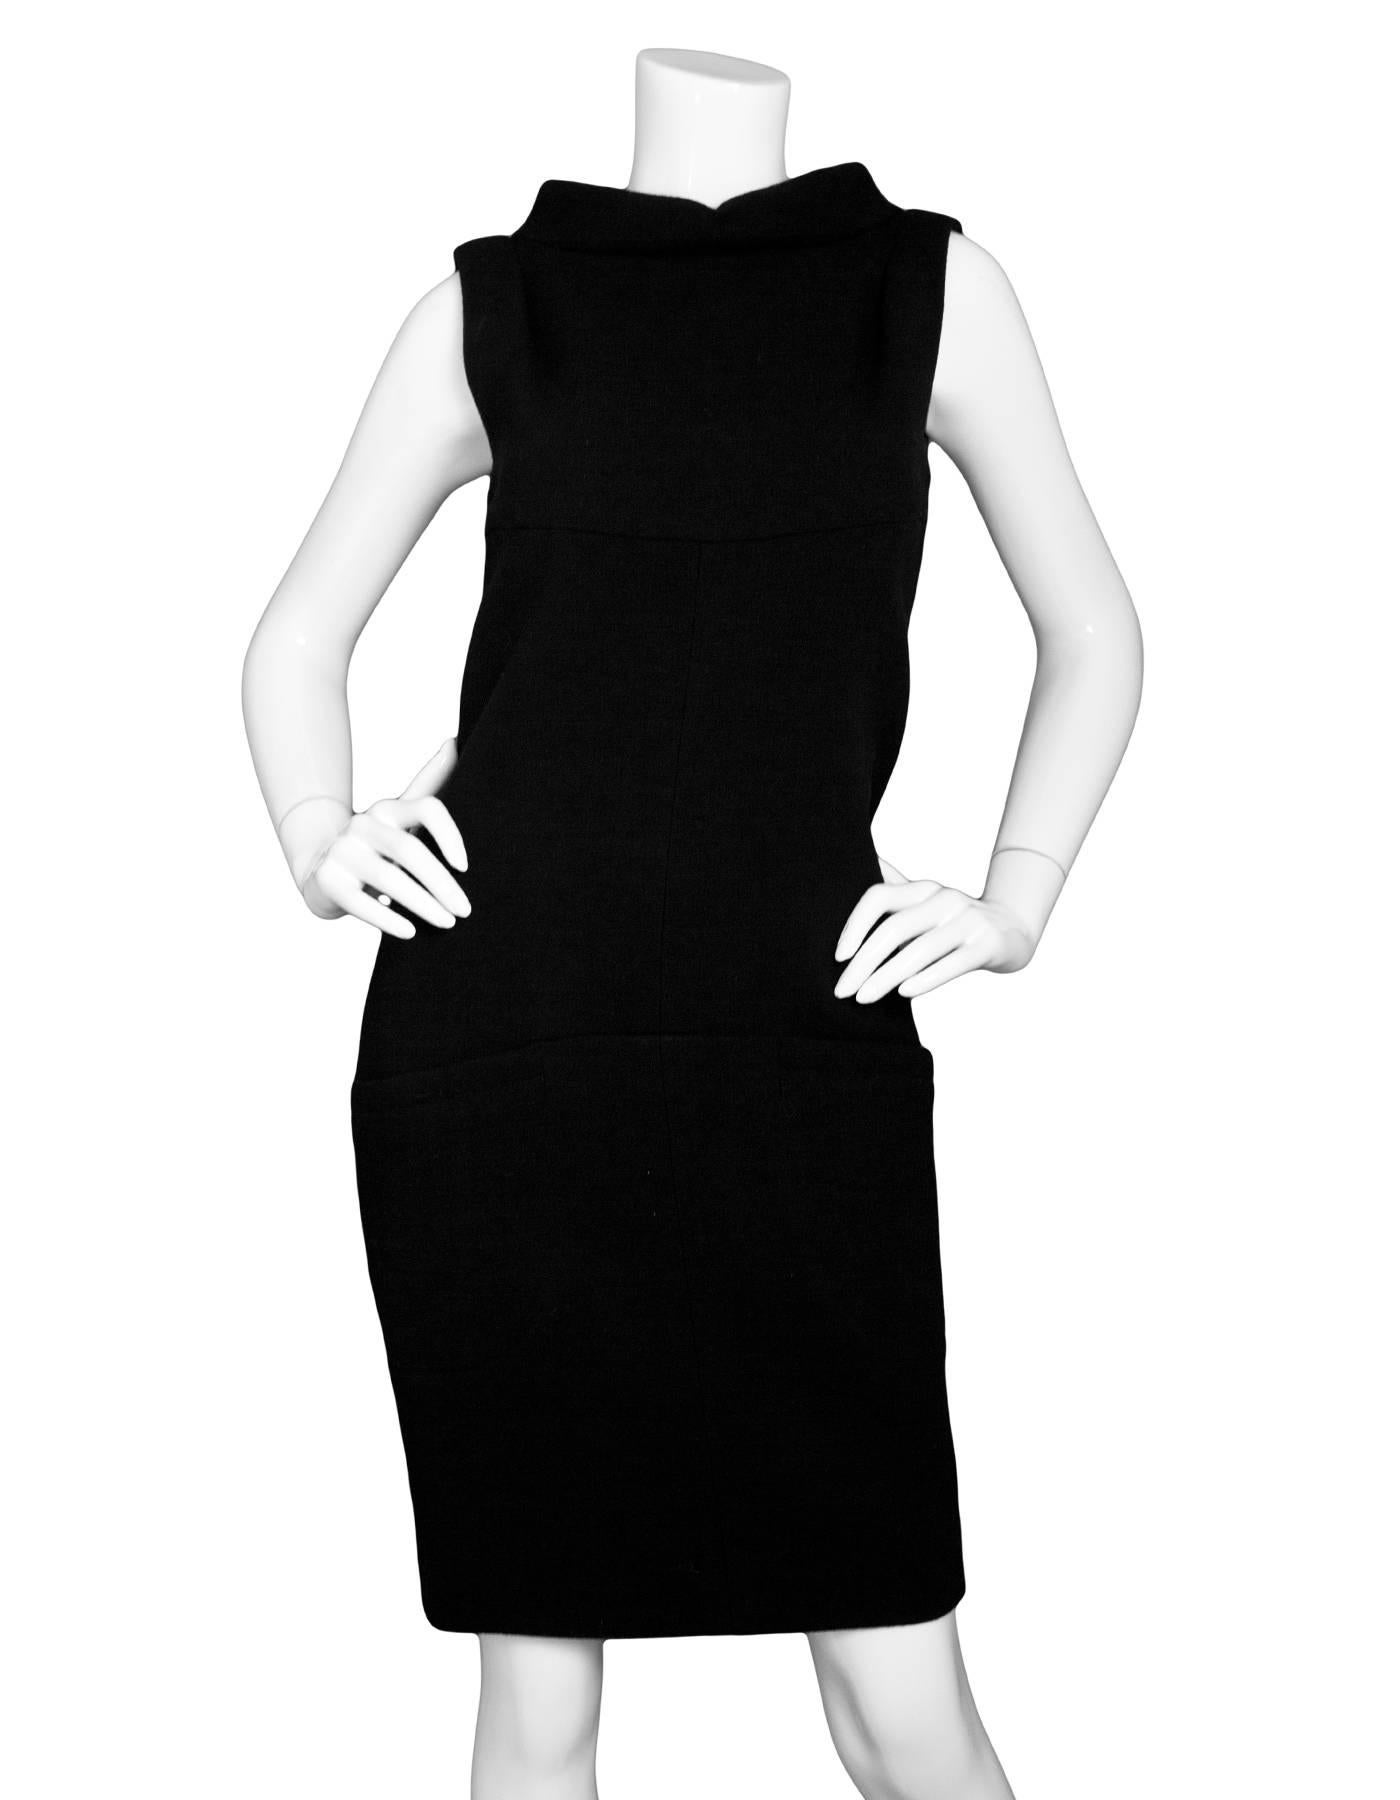 Chanel Black Wool Sleeveless Cowl-Neck Dress Sz FR38

Made In: France
Color: Black
Composition: 99% Wool, 1% Spndex
Lining: Black silk
Closure/Opening: Zip closure at back with keyhole detail and decorative button at neck
Exterior Pockets: Two slit